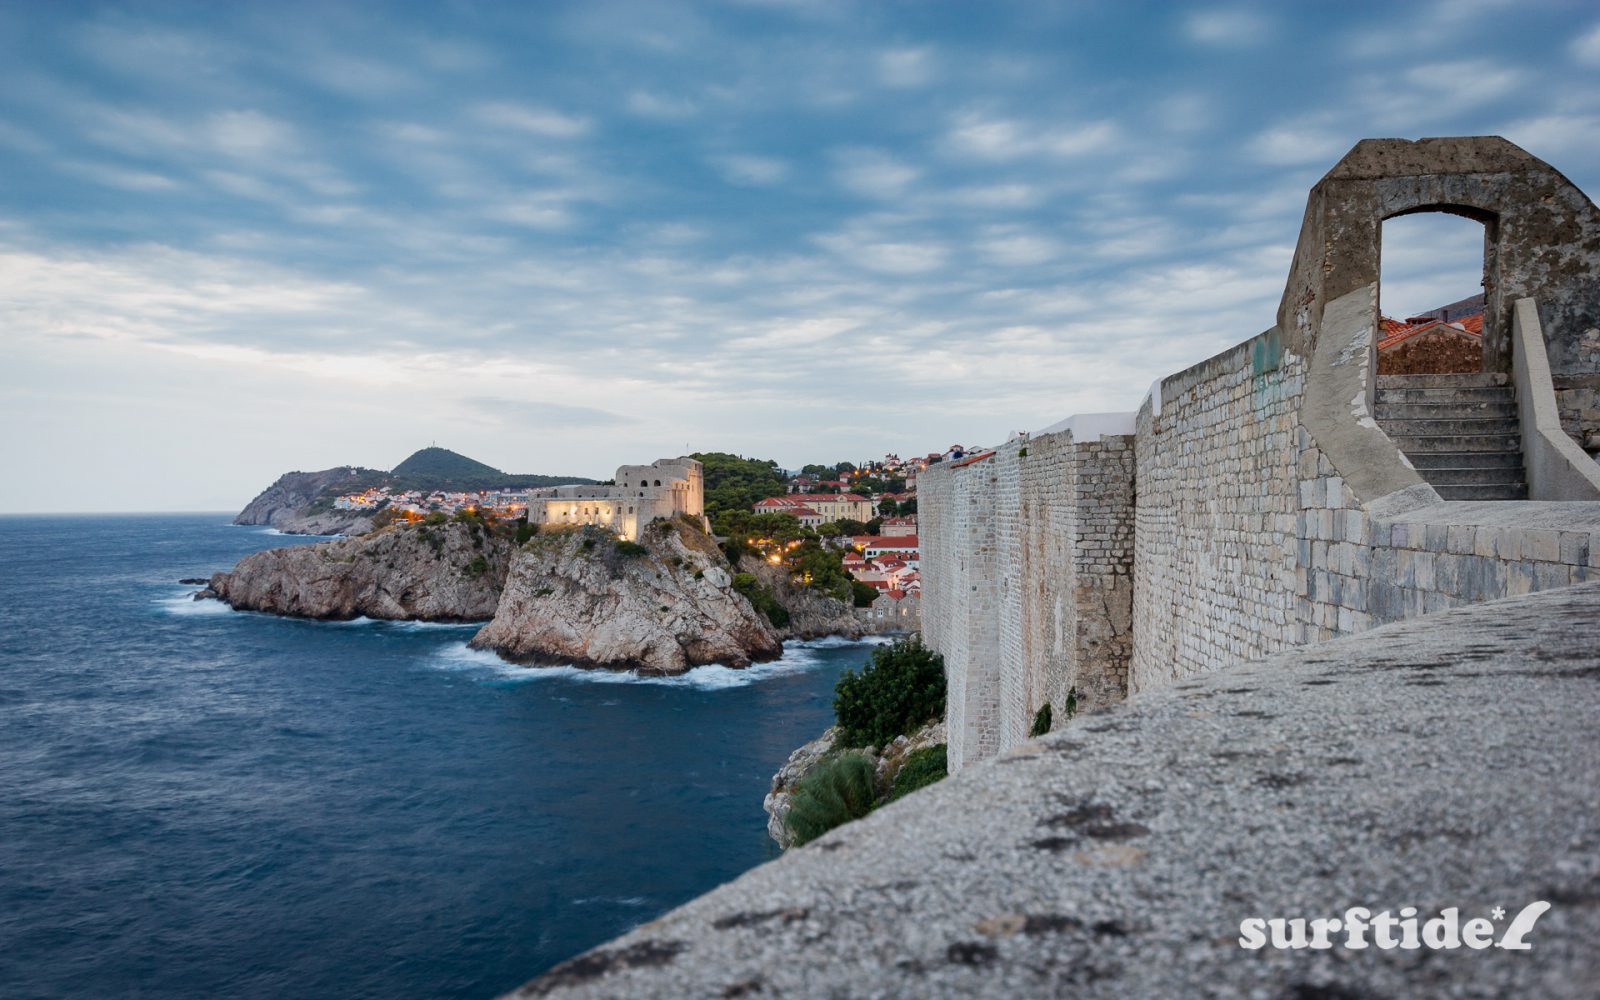 The view of Fort Lovrijenac from the historic walls in Dubronvik, southern Croatia